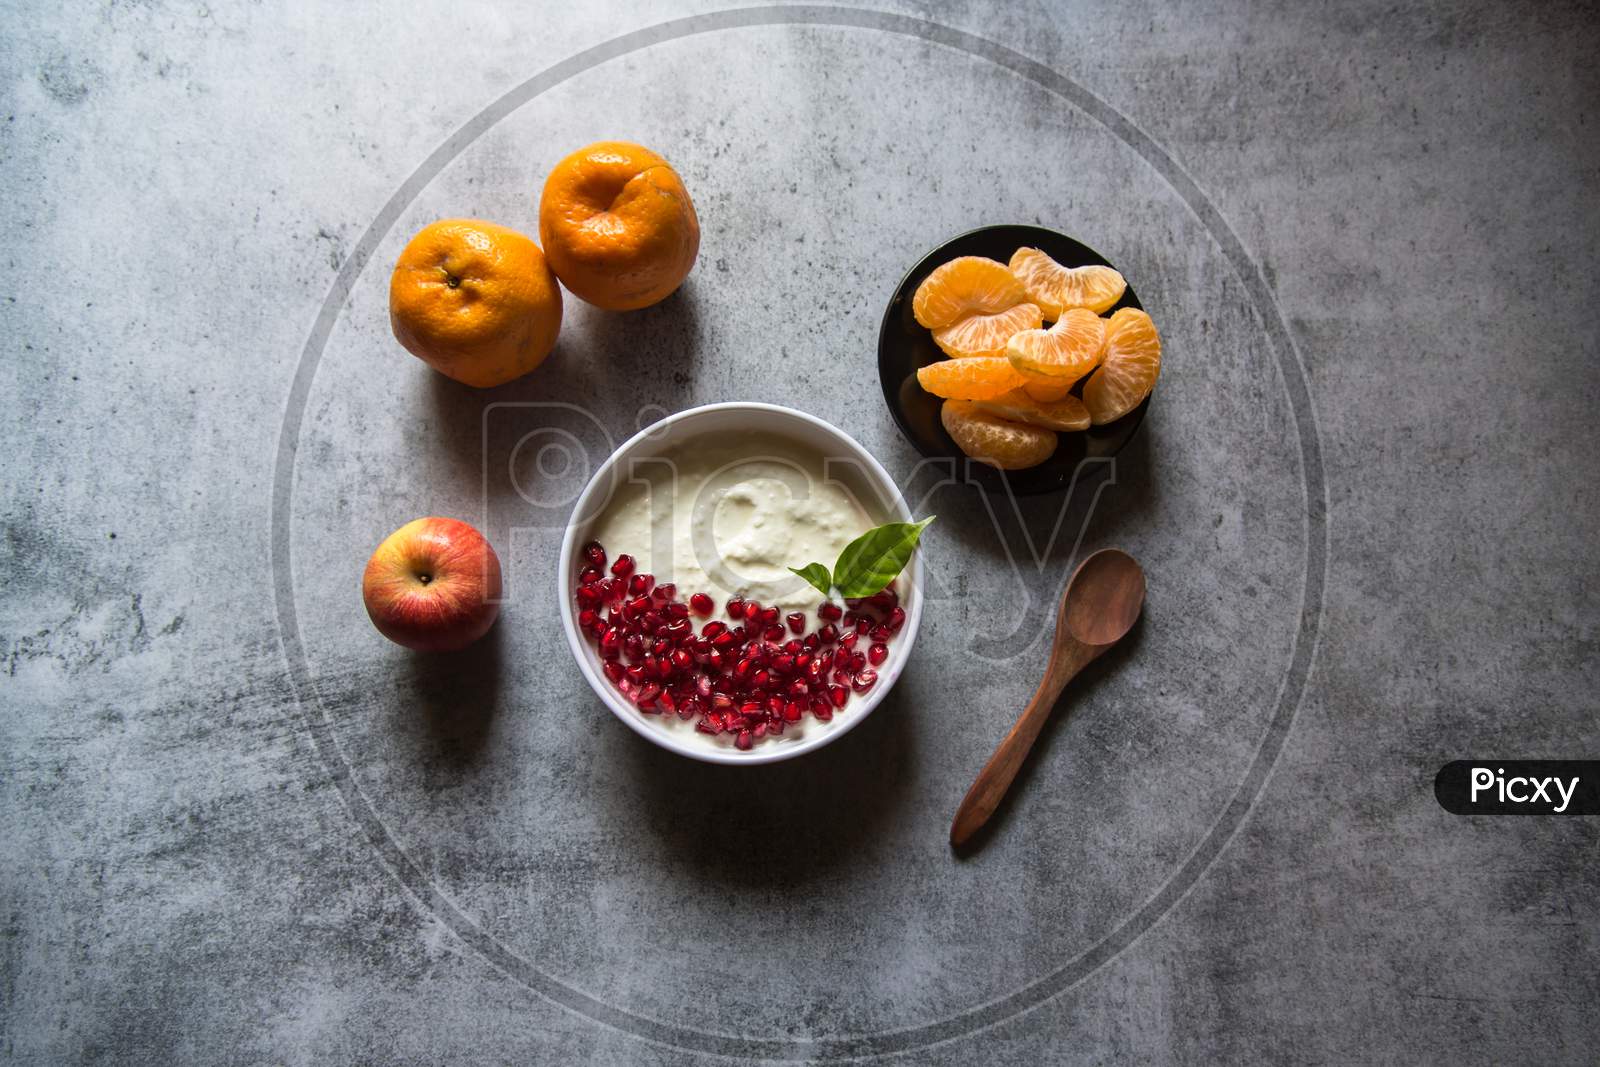 Fresh yogurt and pomegranate seeds in a bowl